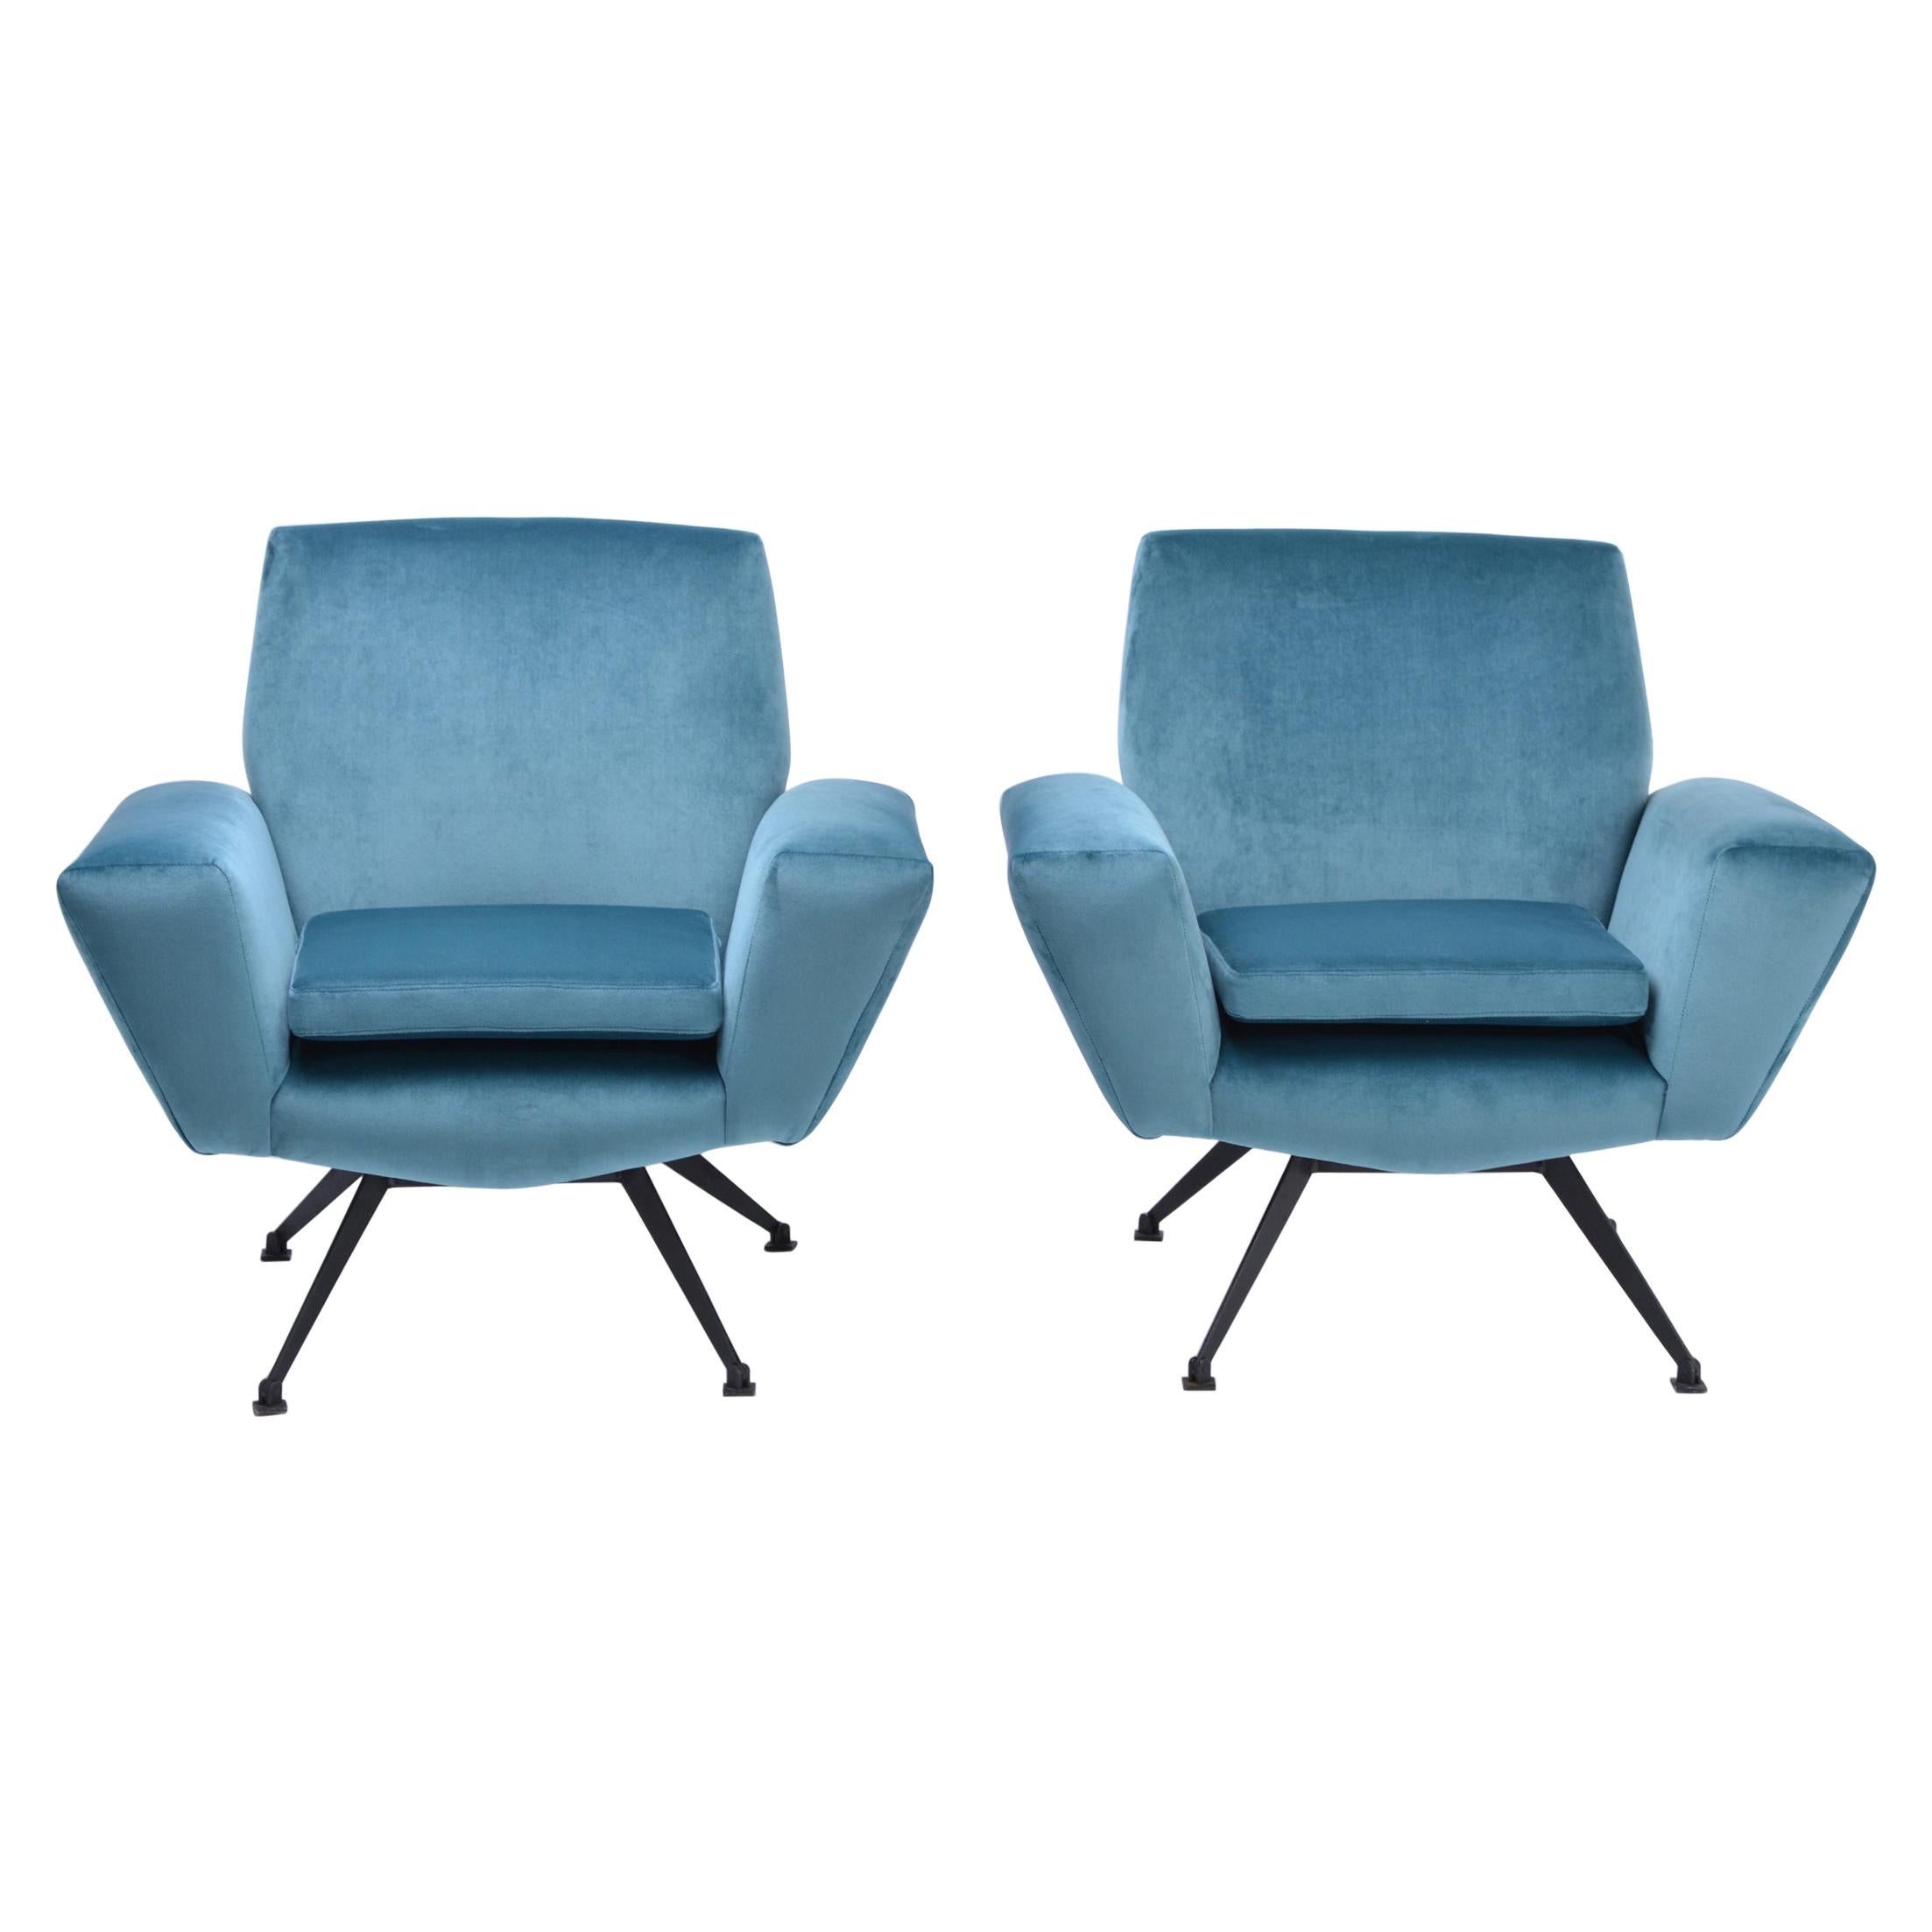 Set of Two Blue Reupholstered Italian Mid-Century Modern Lounge Chairs by Lenzi